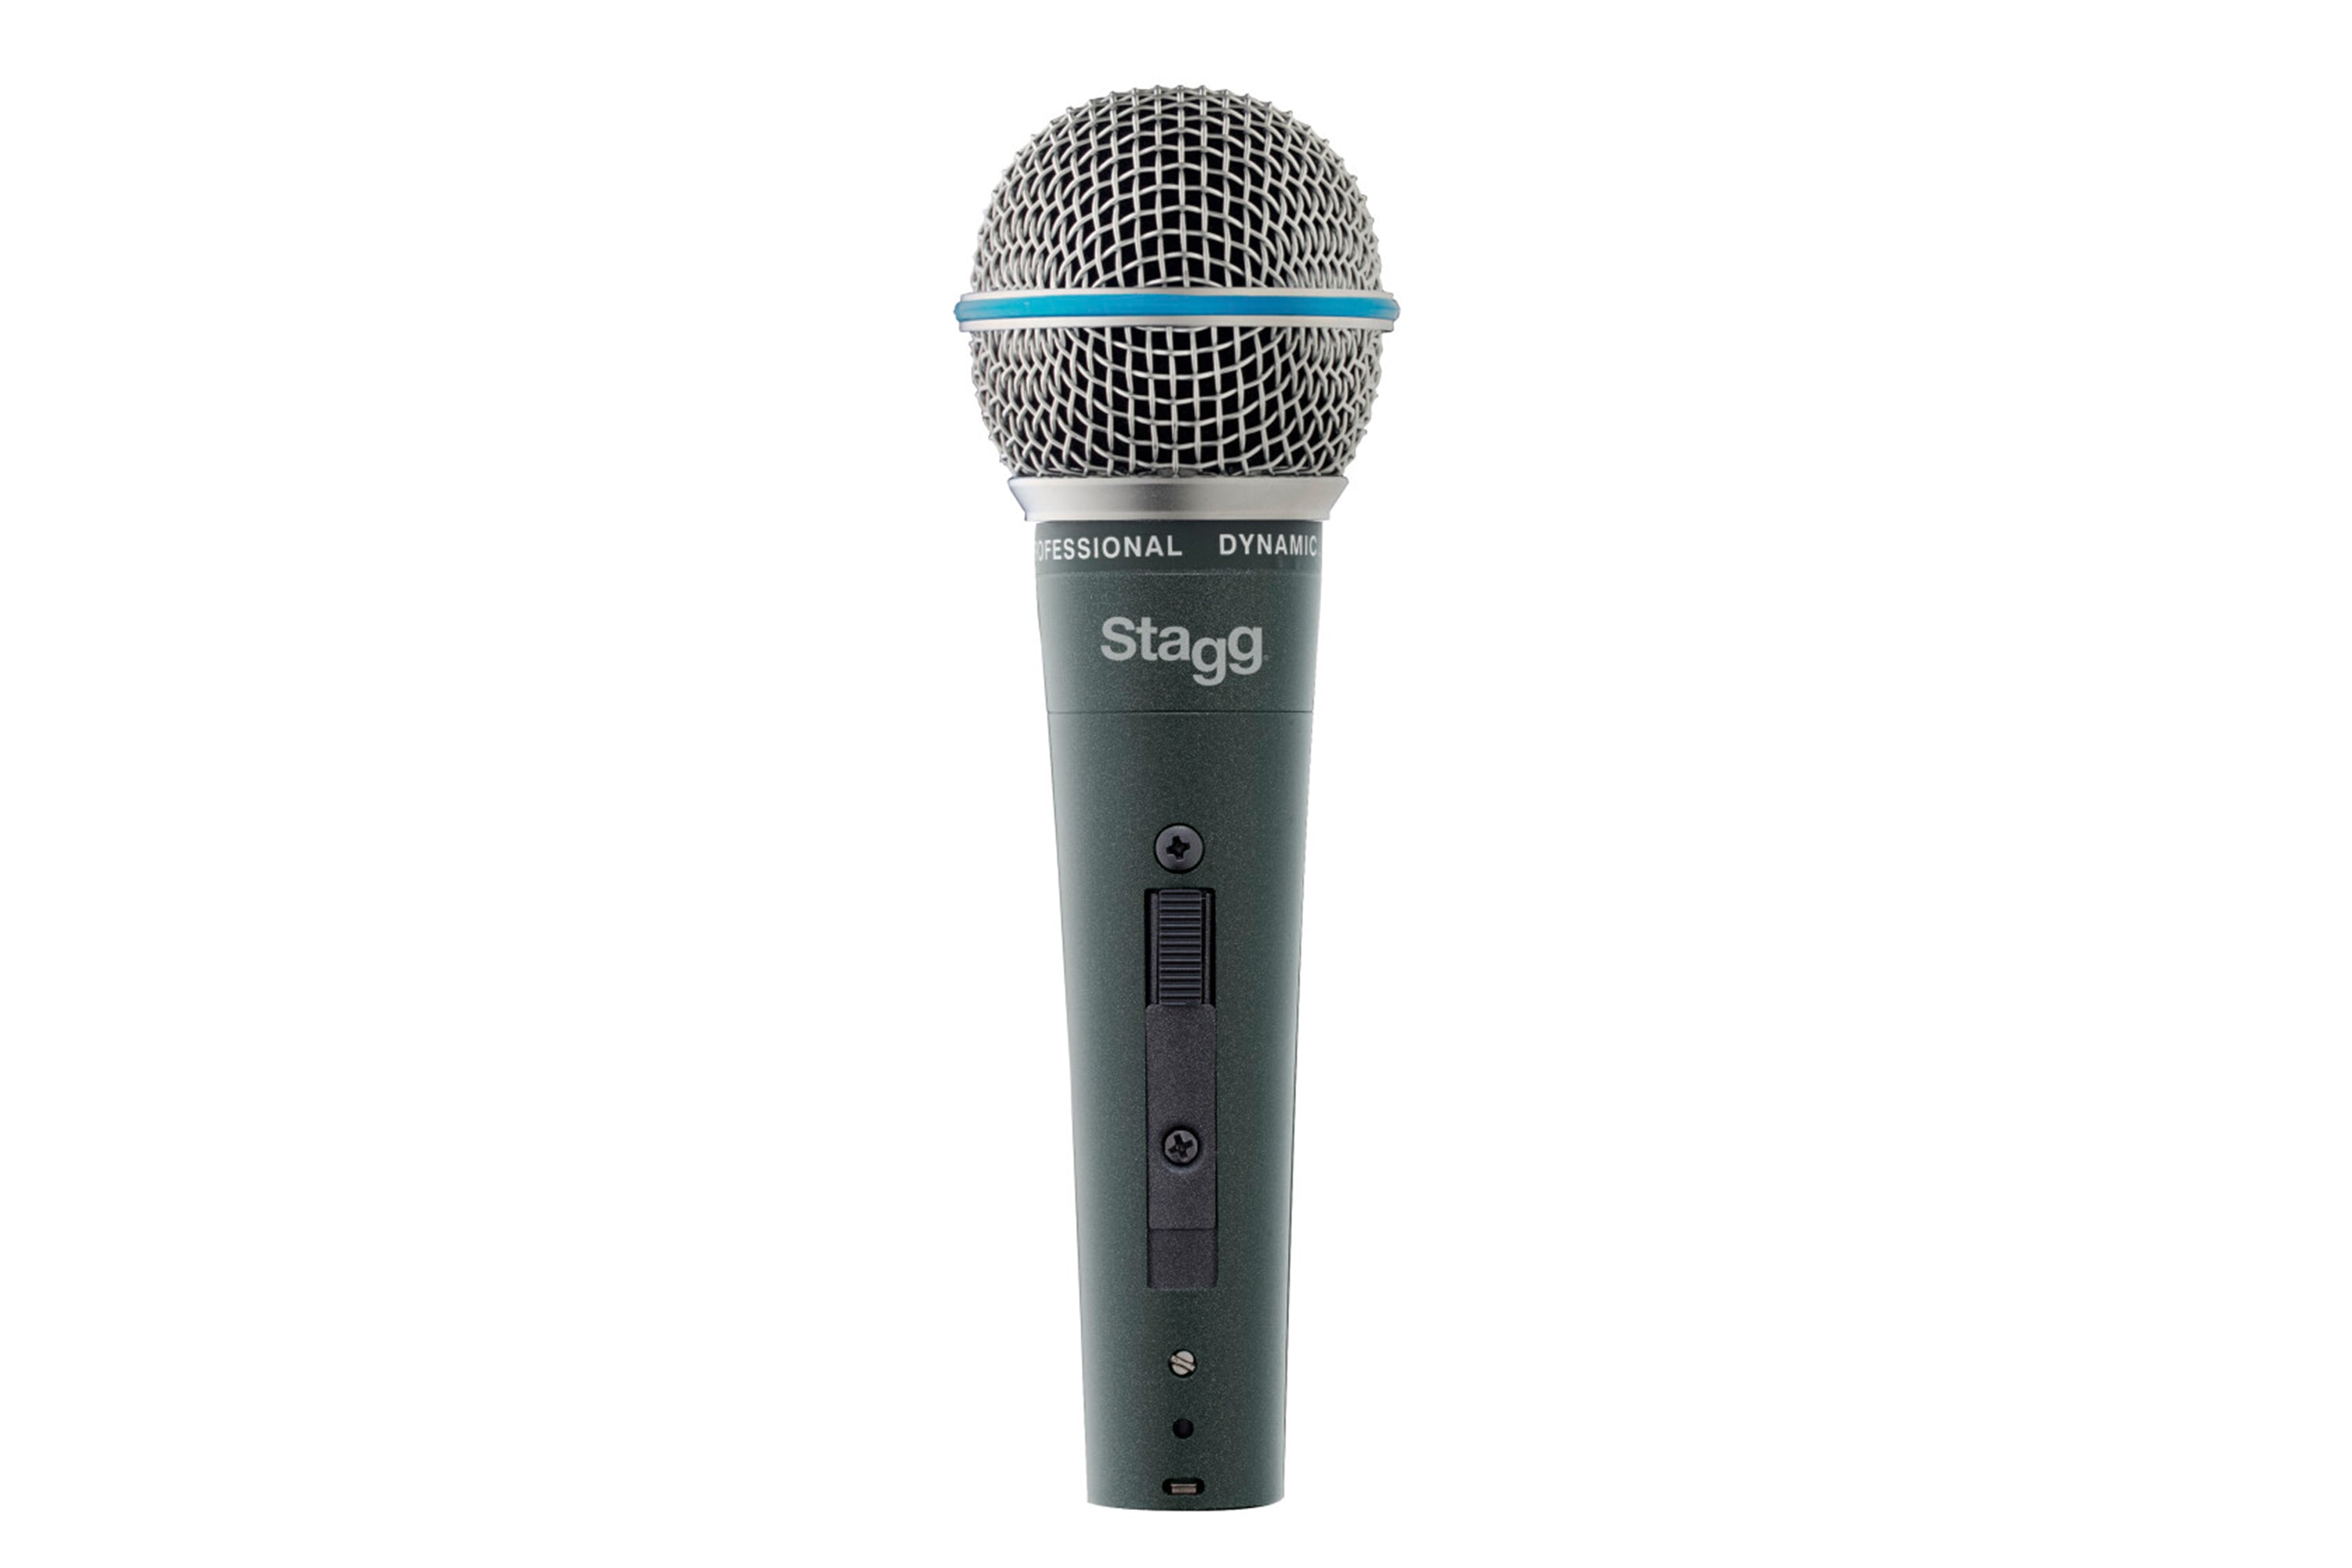 Stagg SDM60 Professional Microphone